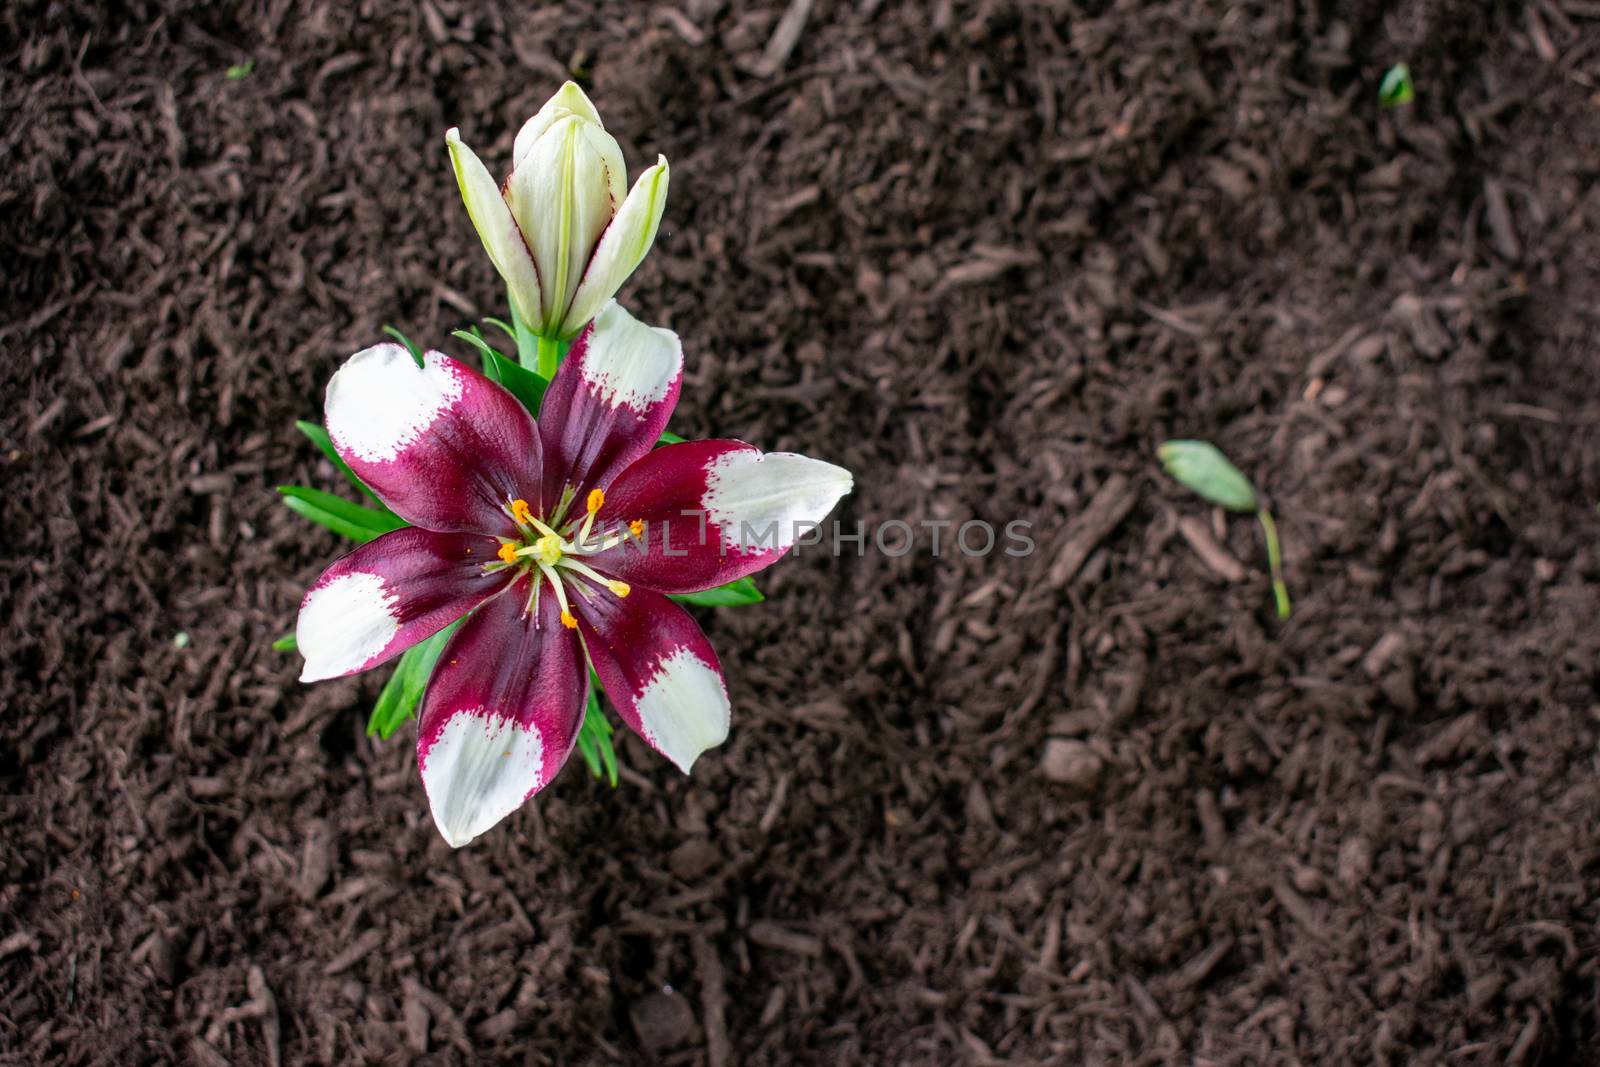 A White and Purple Flower in a Bed of Mulch by bju12290